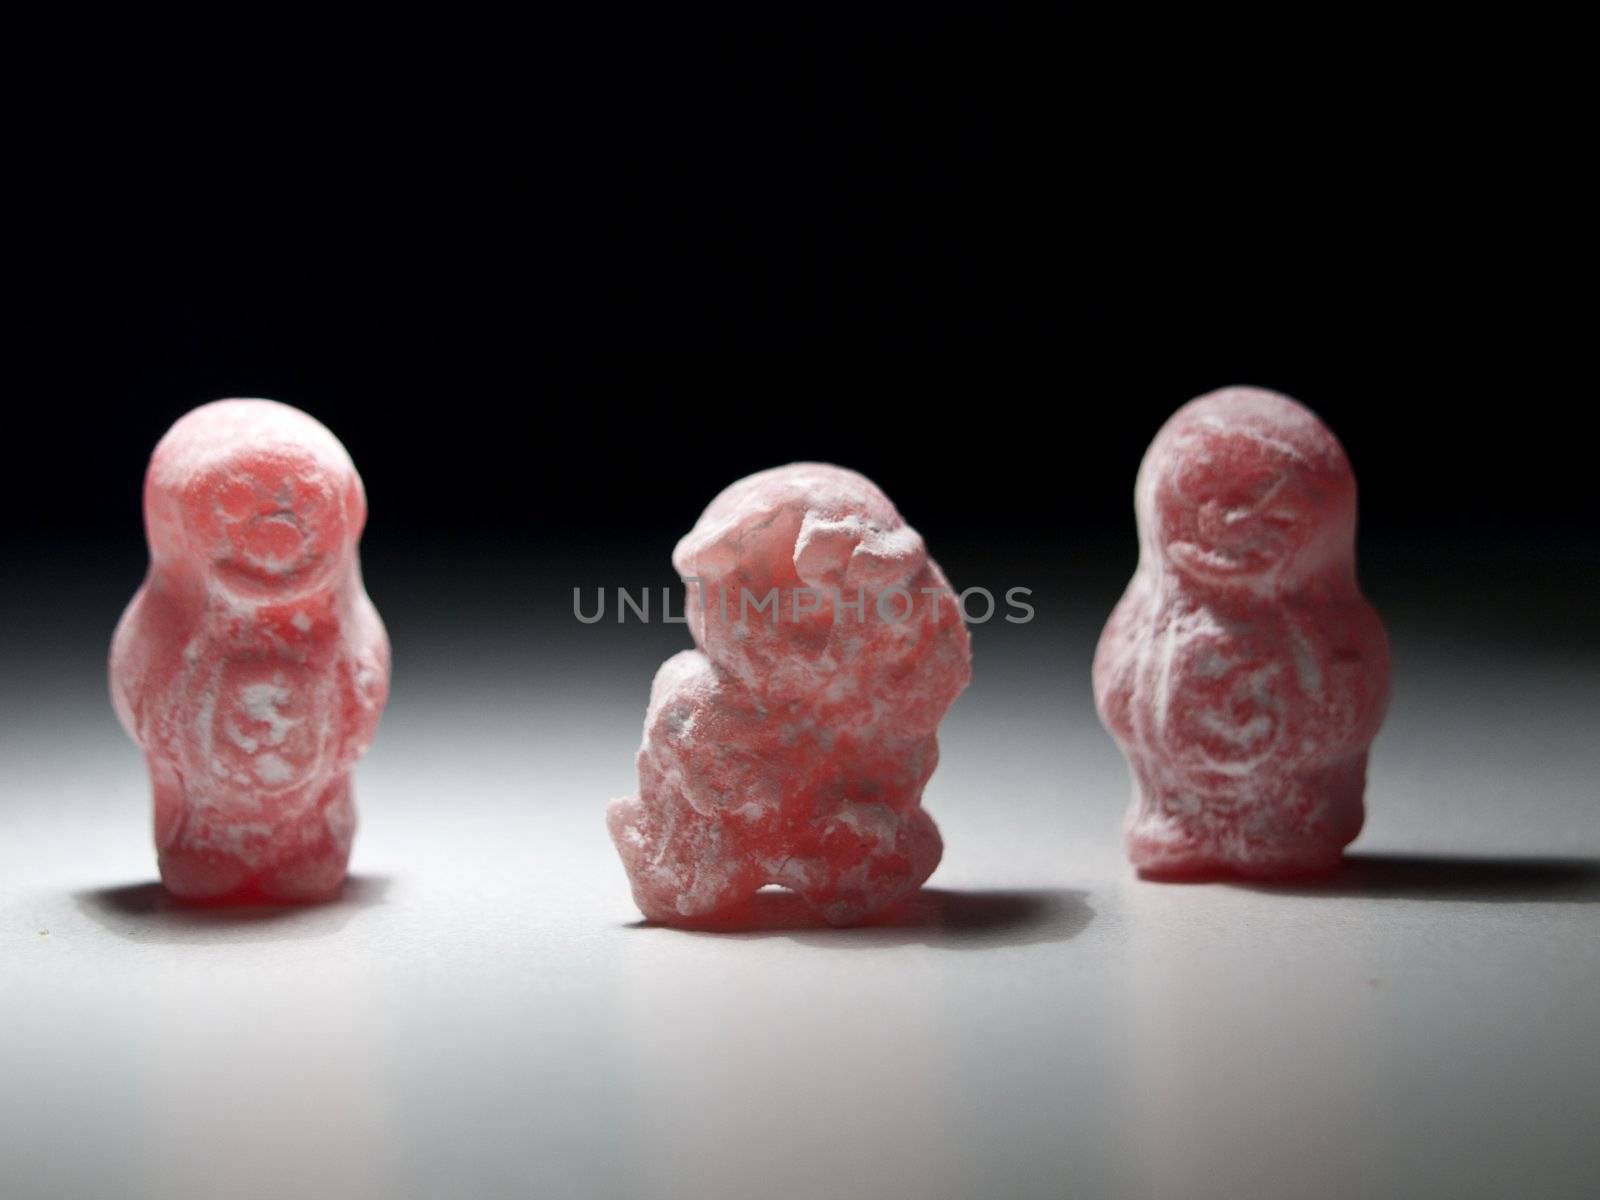 three jelly babies arranged creativly for a fun picture